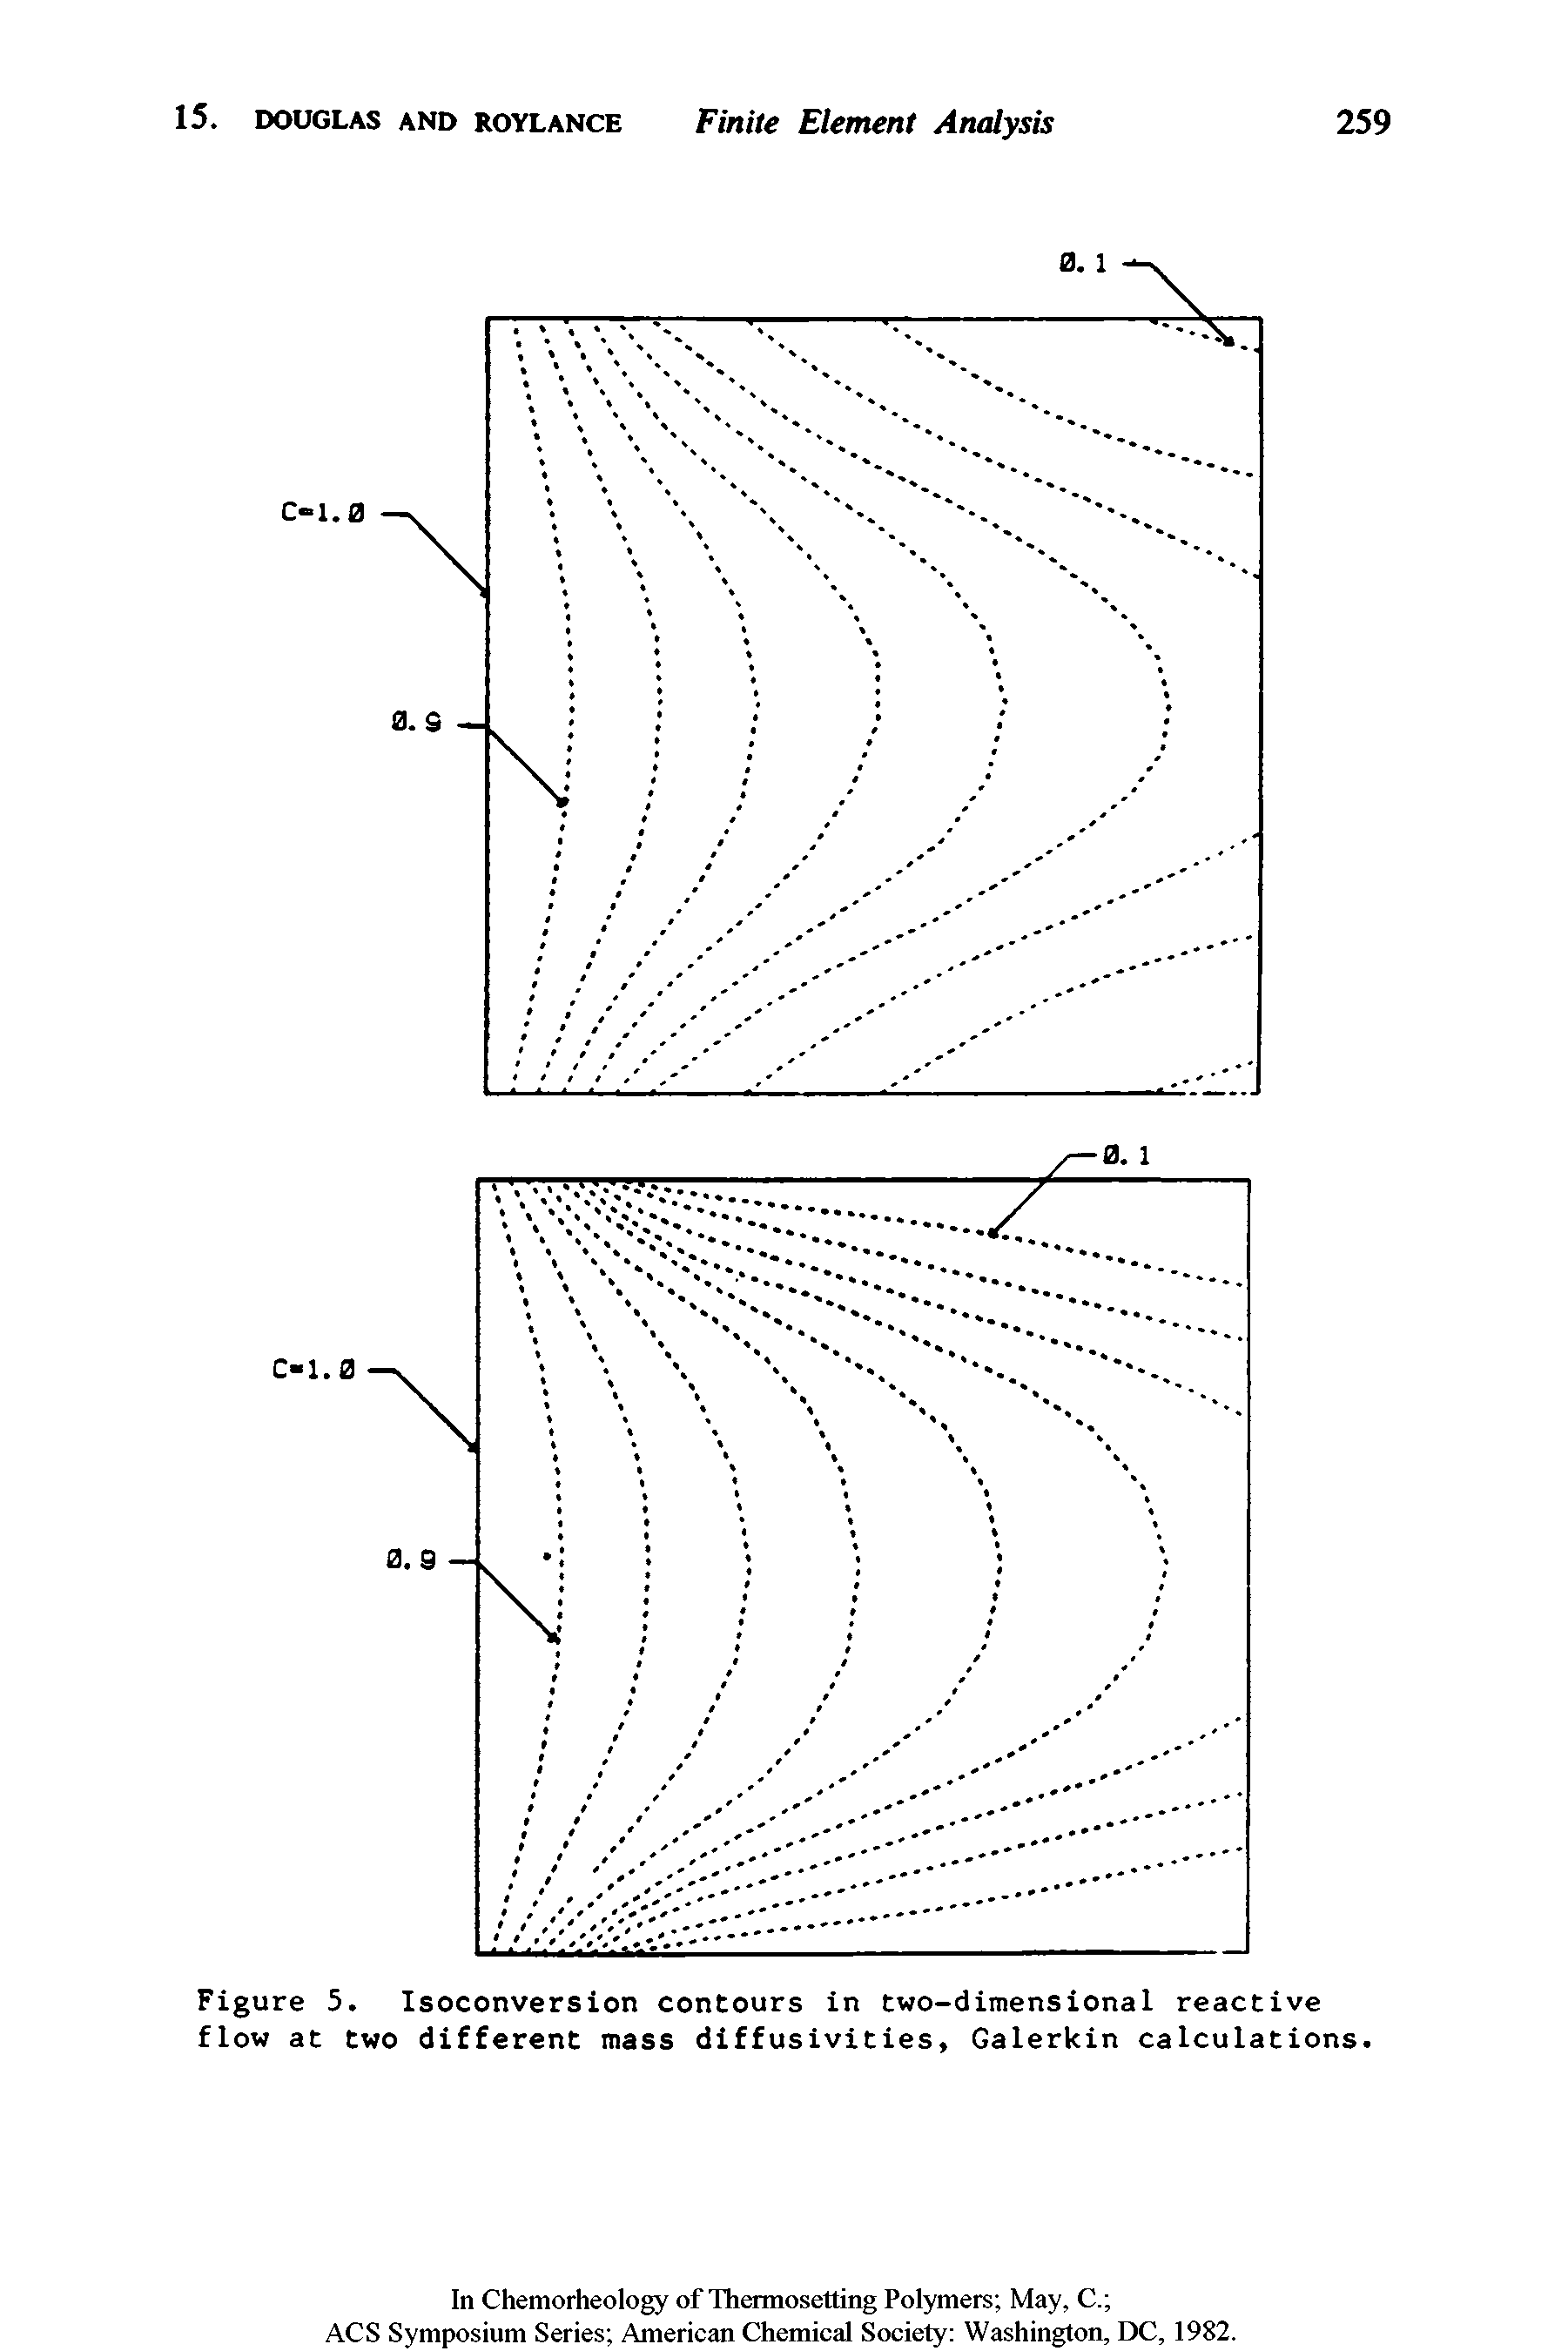 Figure 5. Isoconversion contours in two-dimensional reactive flow at two different mass diffusivities, Galerkin calculations.